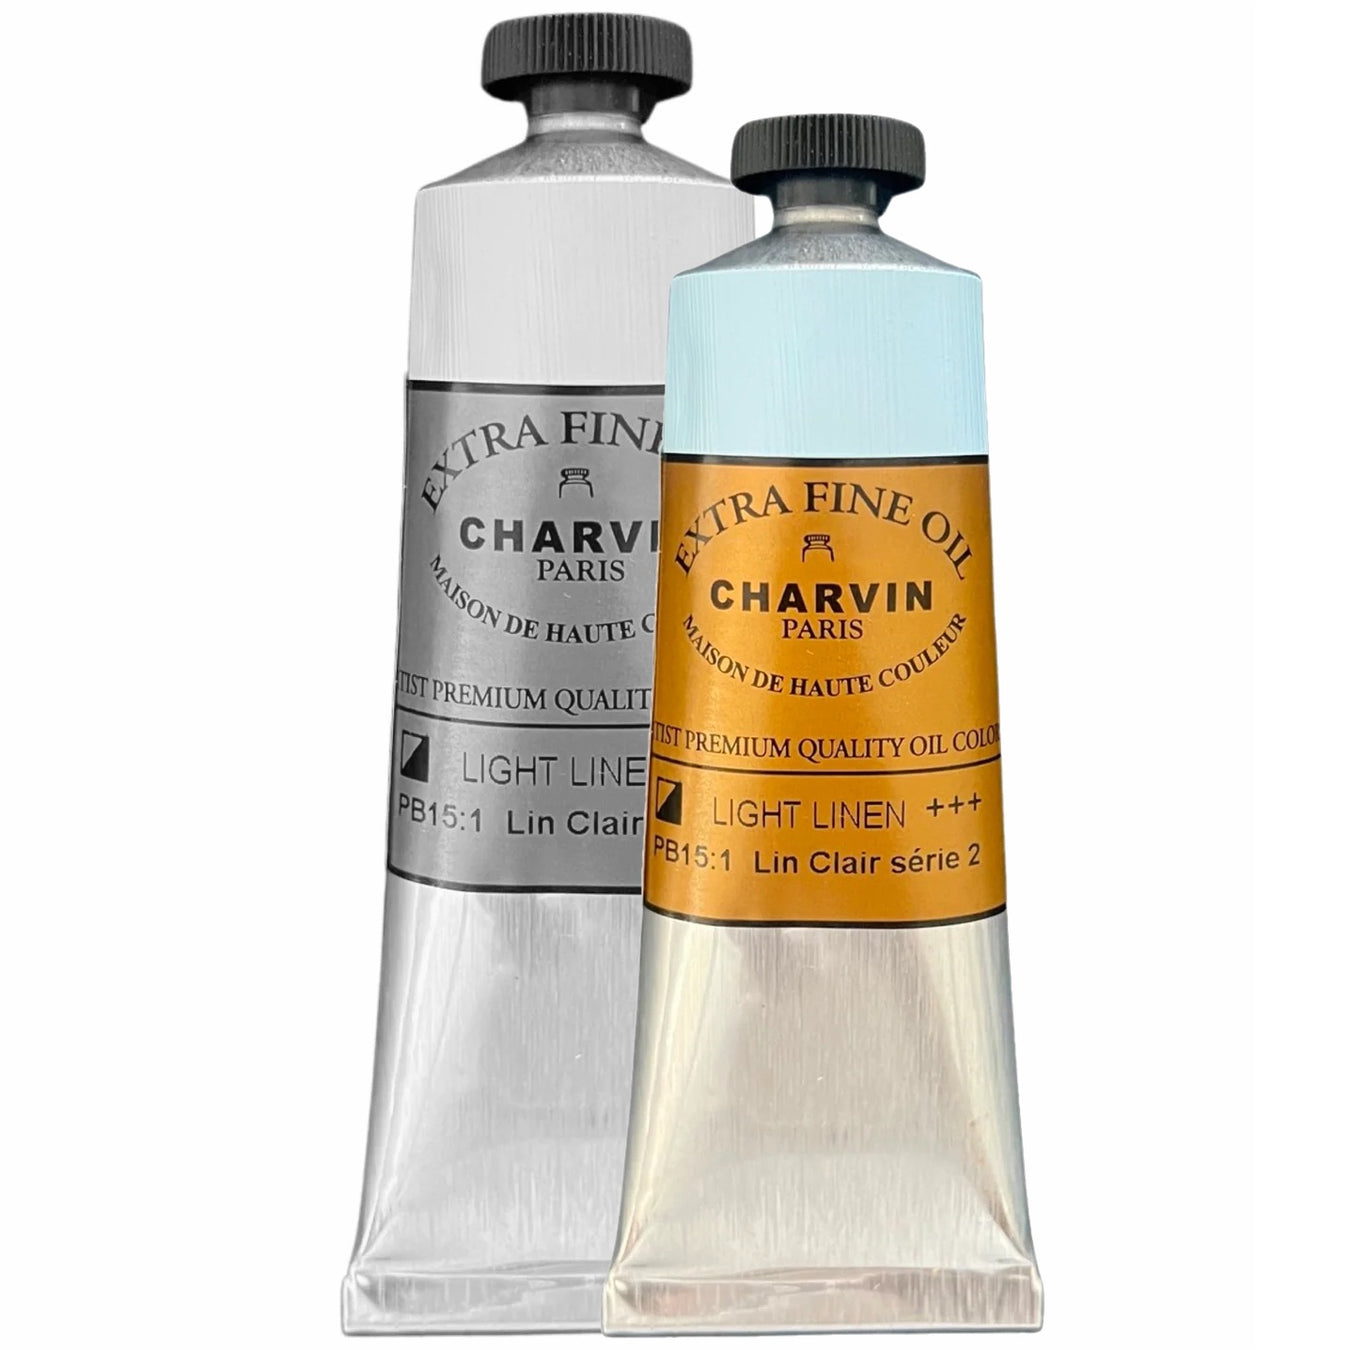 Charvin Extra Fine Oils